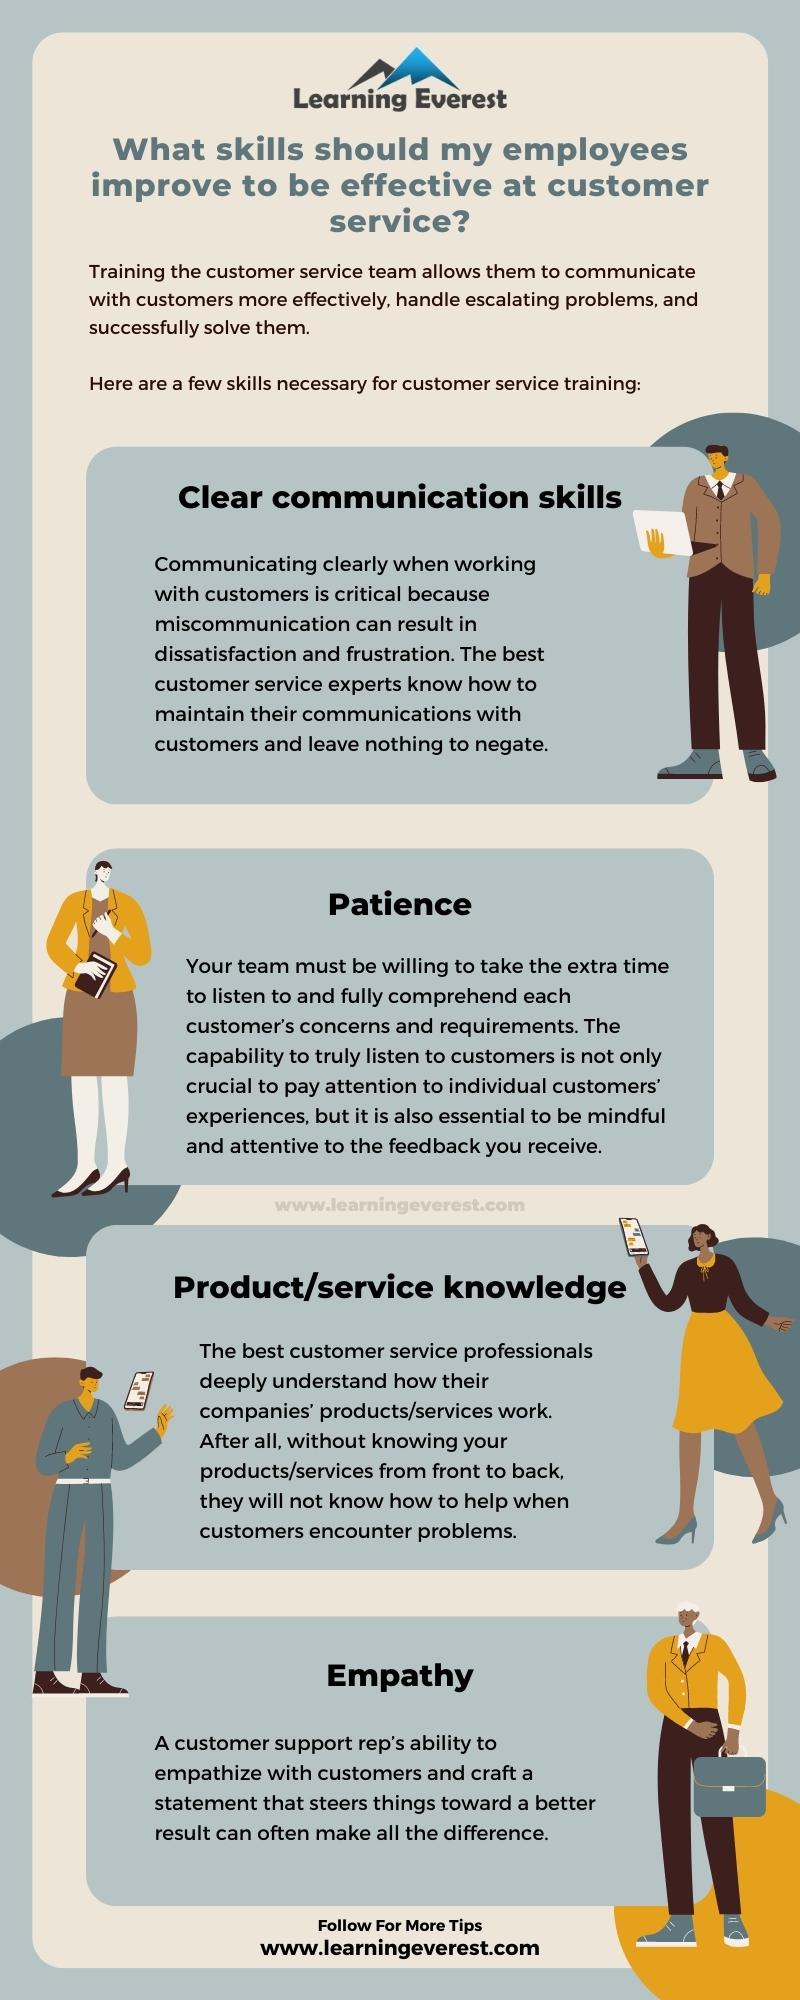 Skills That are Necessary for Customer Service Training